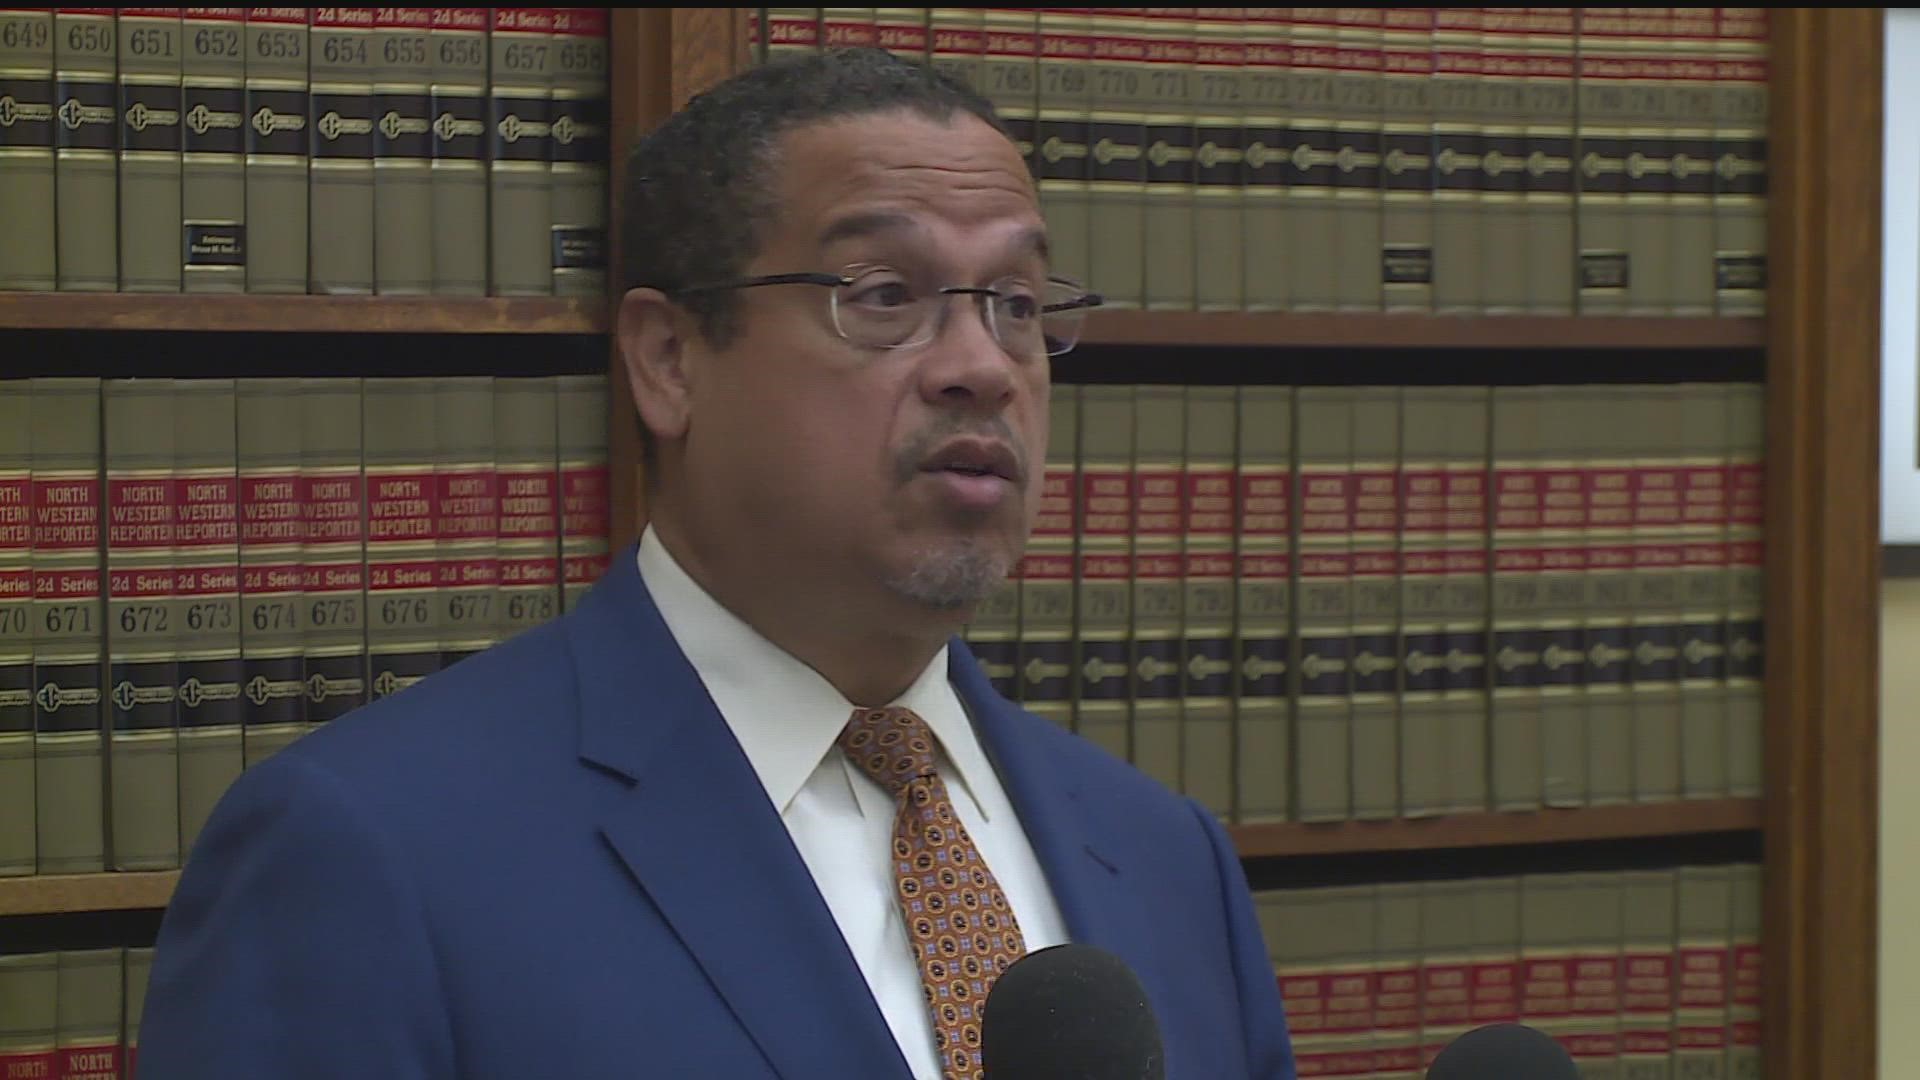 Minnesota Attorney General Keith Ellison pledged to fight extradition efforts by other states that would make it illegal to get an abortion here.